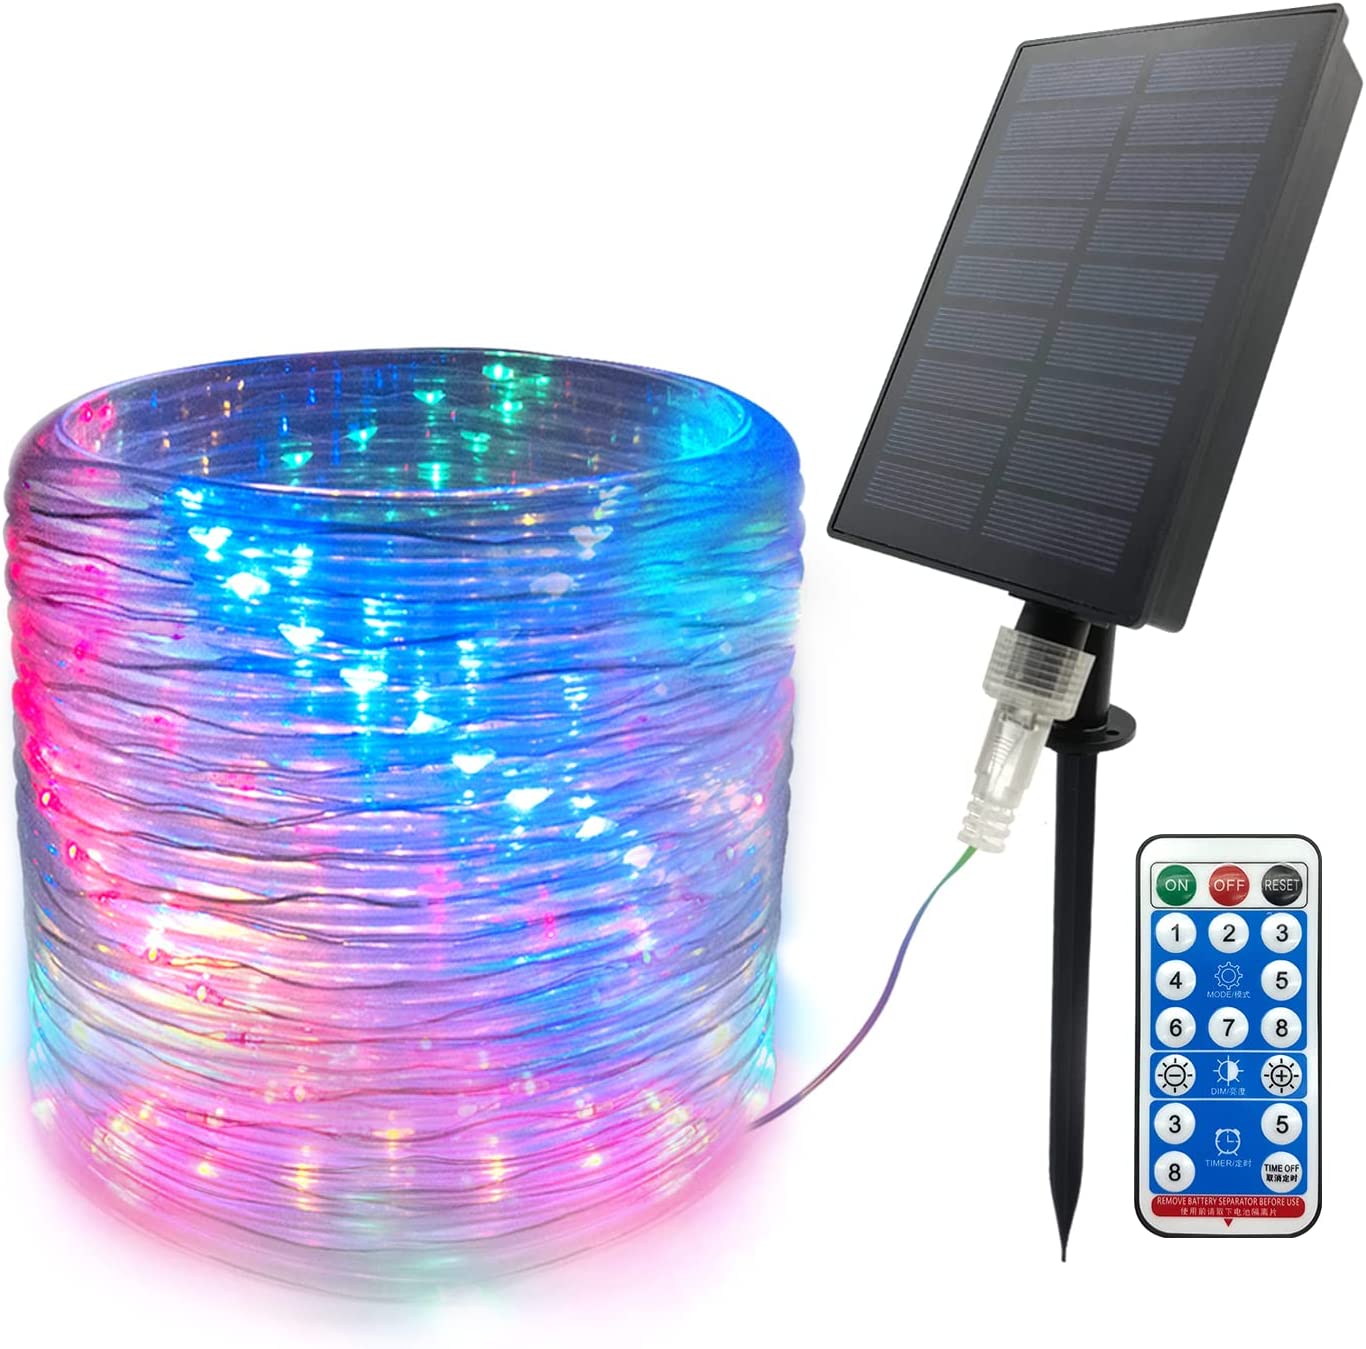 GLPE Solar Rope Lights Outdoor Waterproof LED, 66ft 200 LEDs Fairy Lights Solar Powered ,8 Lighting Modes Color Changing Rope Lights with Remote for Christmas Garden Swimming Pool Trampoline